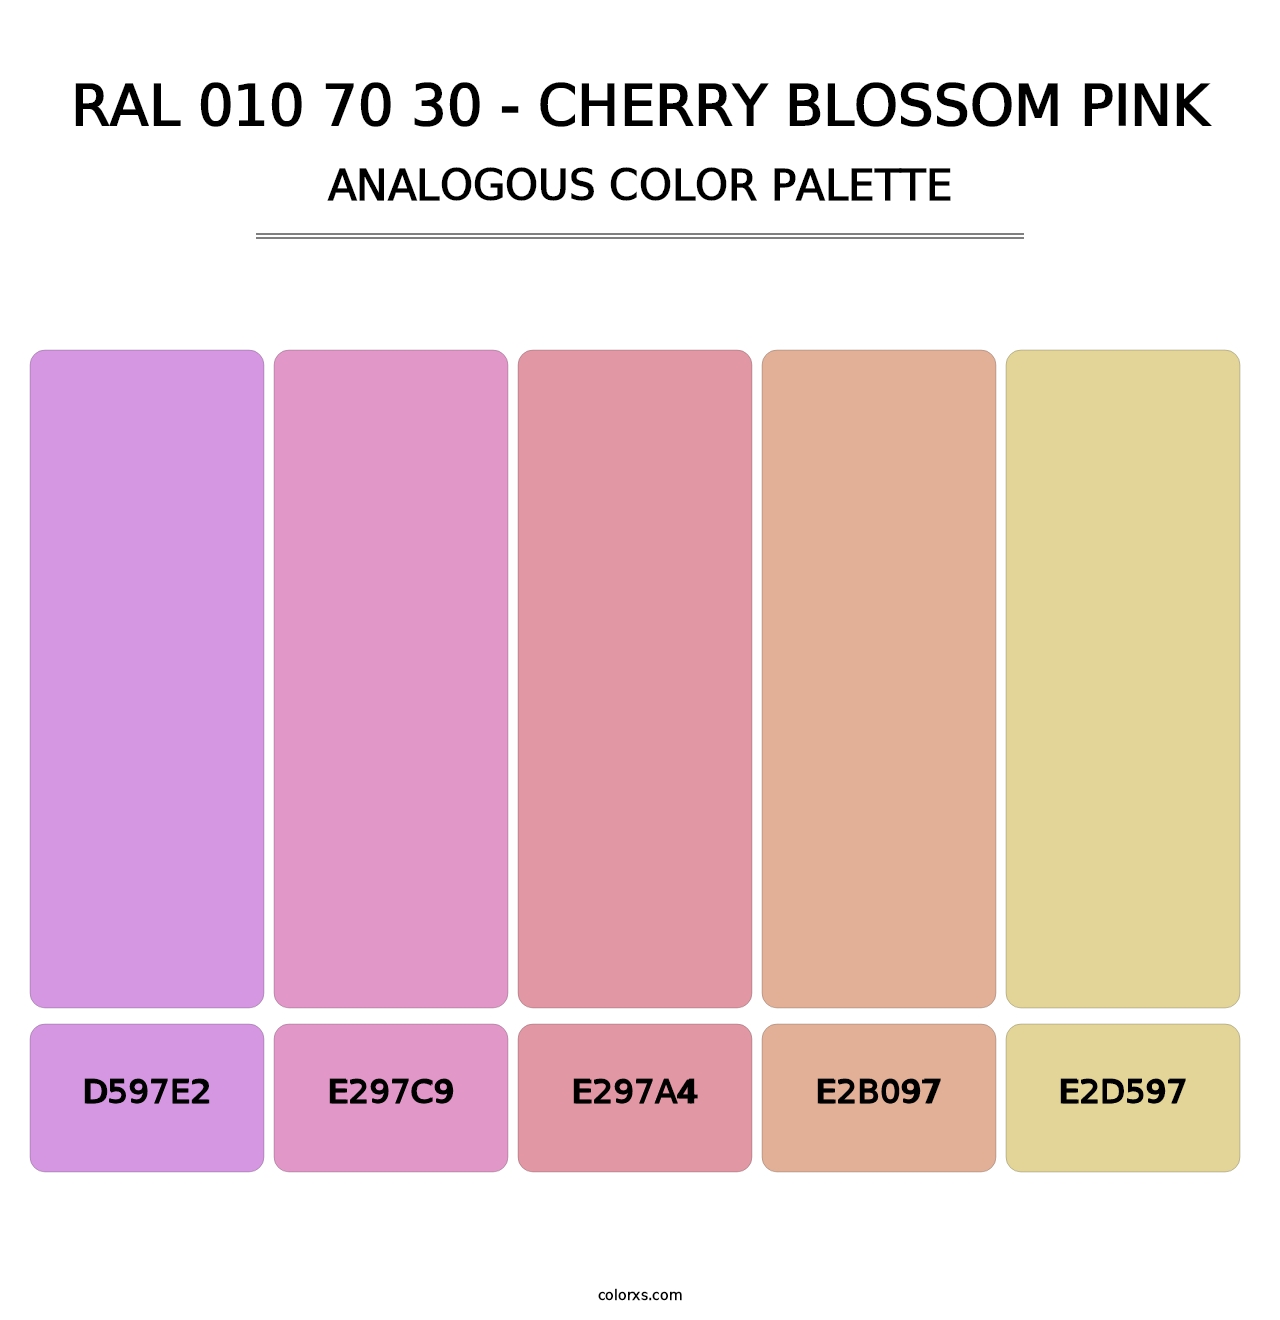 RAL 010 70 30 - Cherry Blossom Pink - Analogous Color Palette